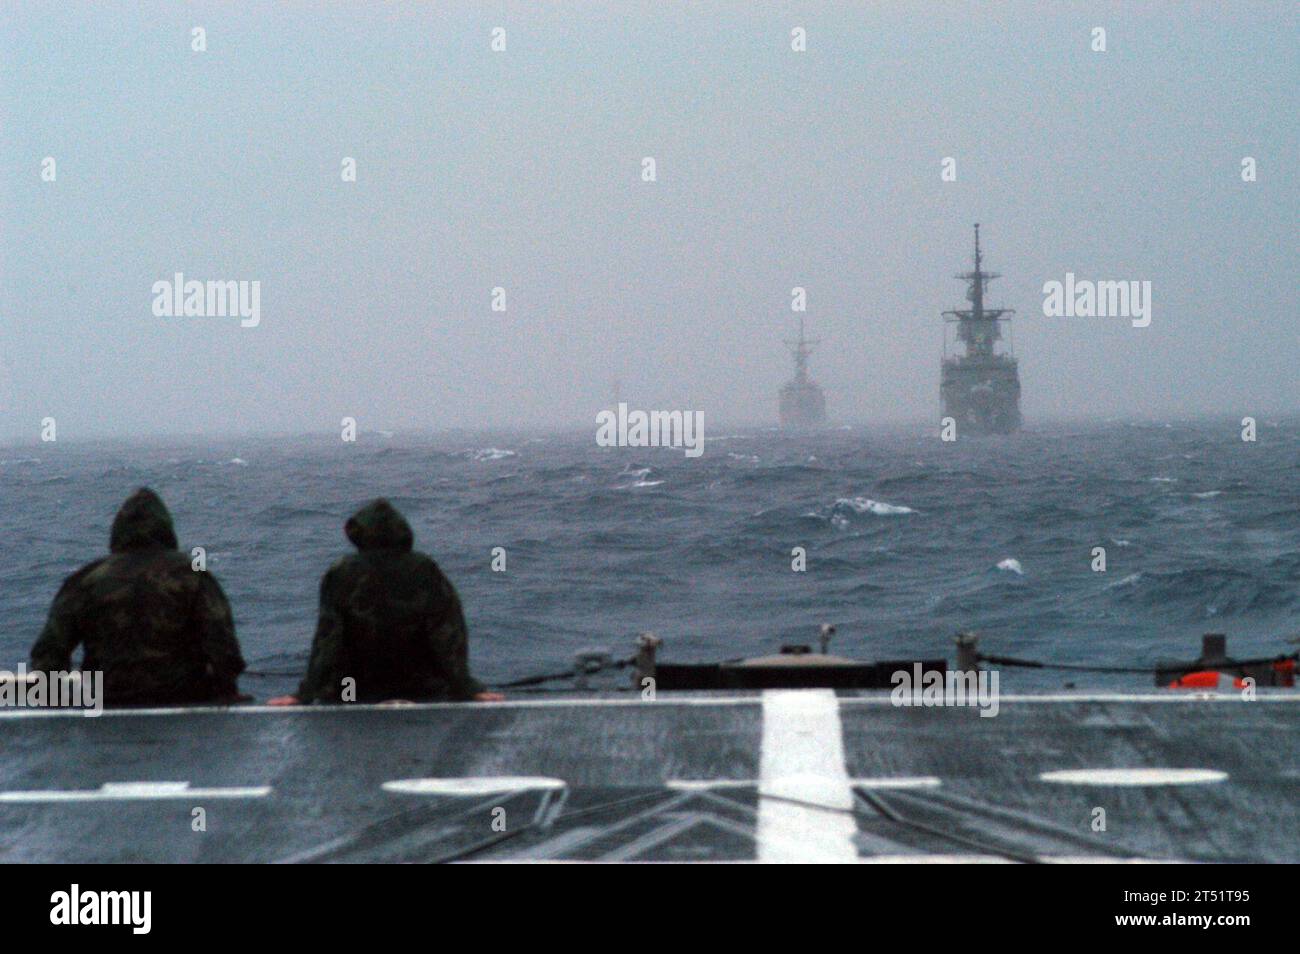 0806133581D-006 GULF OF THAILAND (June 13, 2008) Two Sailors watch the Royal Thai Navy frigate HTMS Phutta Loetla Naphalai (FF 462) and the frigate USS Ford (FFG 54) encounter rough seas, low visibility, high winds, and rain squalls from the fantail of the frigate USS Jarrett (FFG 33). Jarrrett is one of several U.S. and Thai ships taking part in Cooperation Afloat Readiness and Training (CARAT) 2008. U.S. Navy Stock Photo